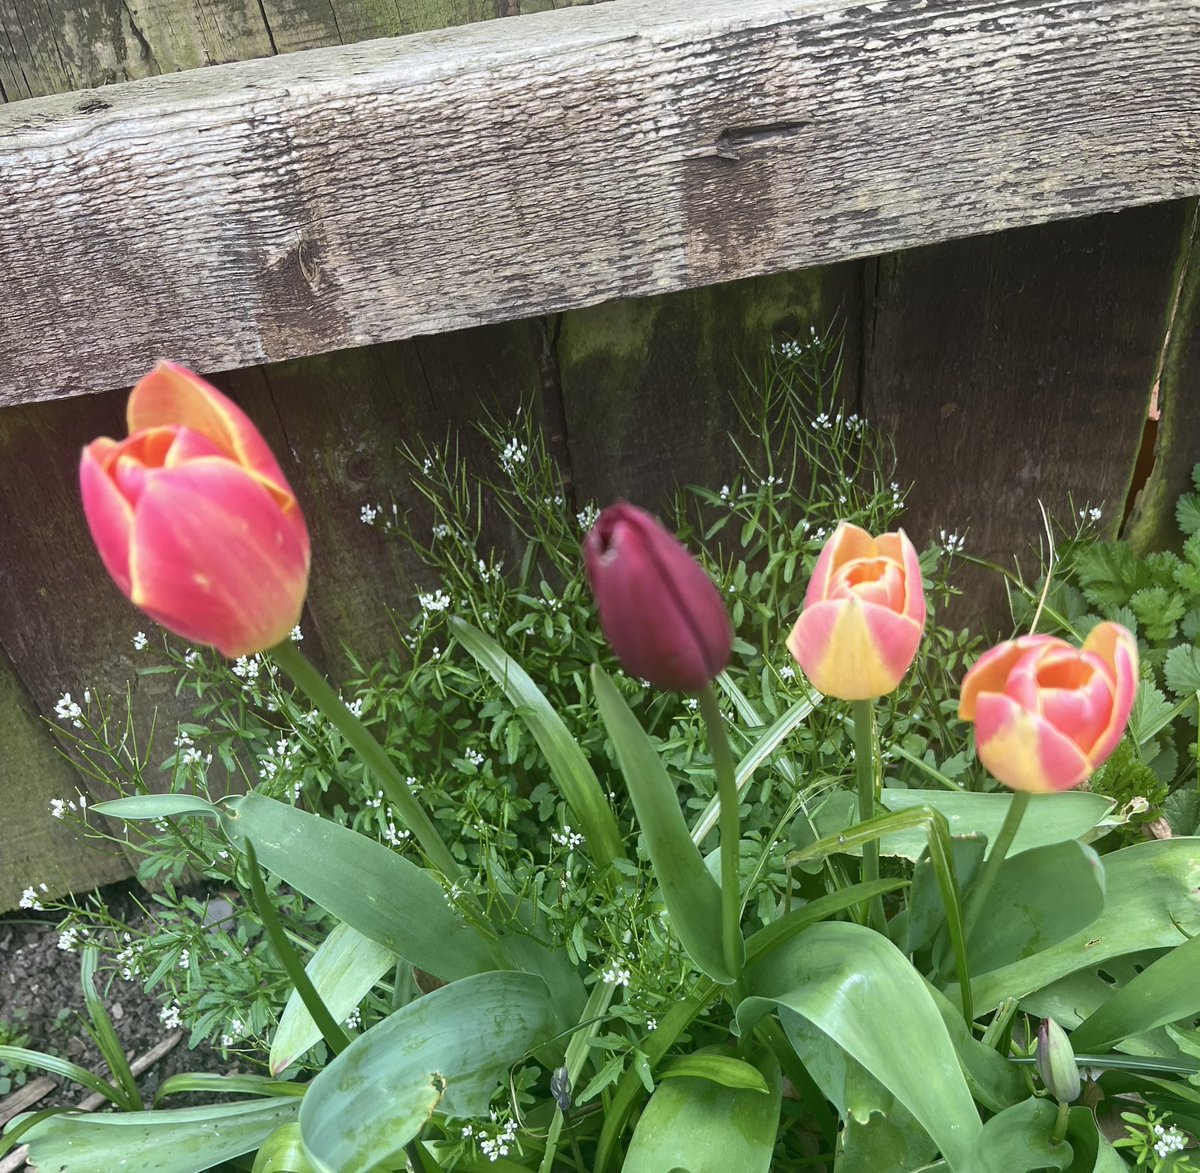 A bit battered by the wind over the last days but these are still beaut, a bit more #tulip mania…